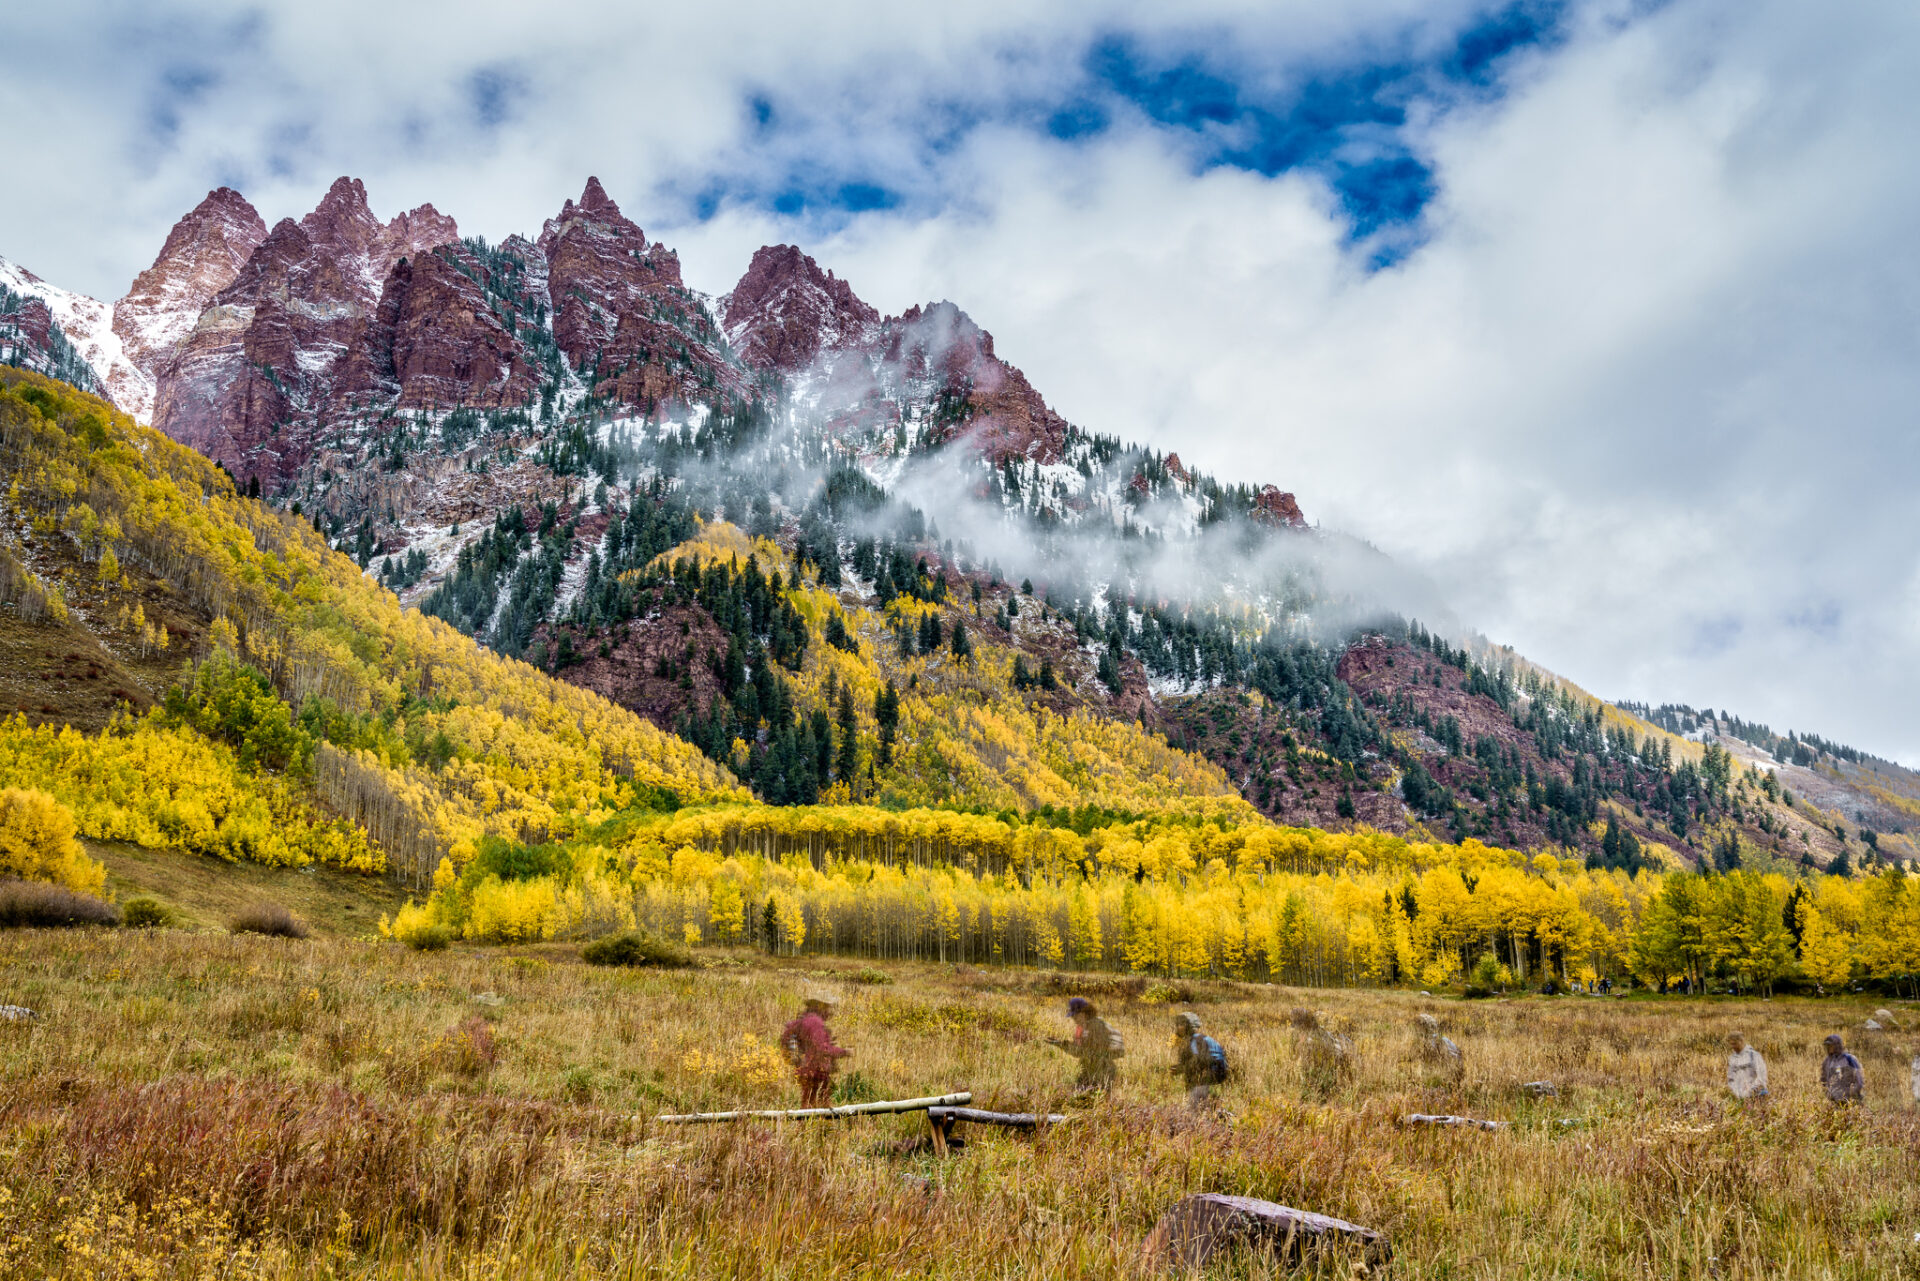 Ghost Hikers and Fall Colors beneath Wintry Peaks near Maroon Bells